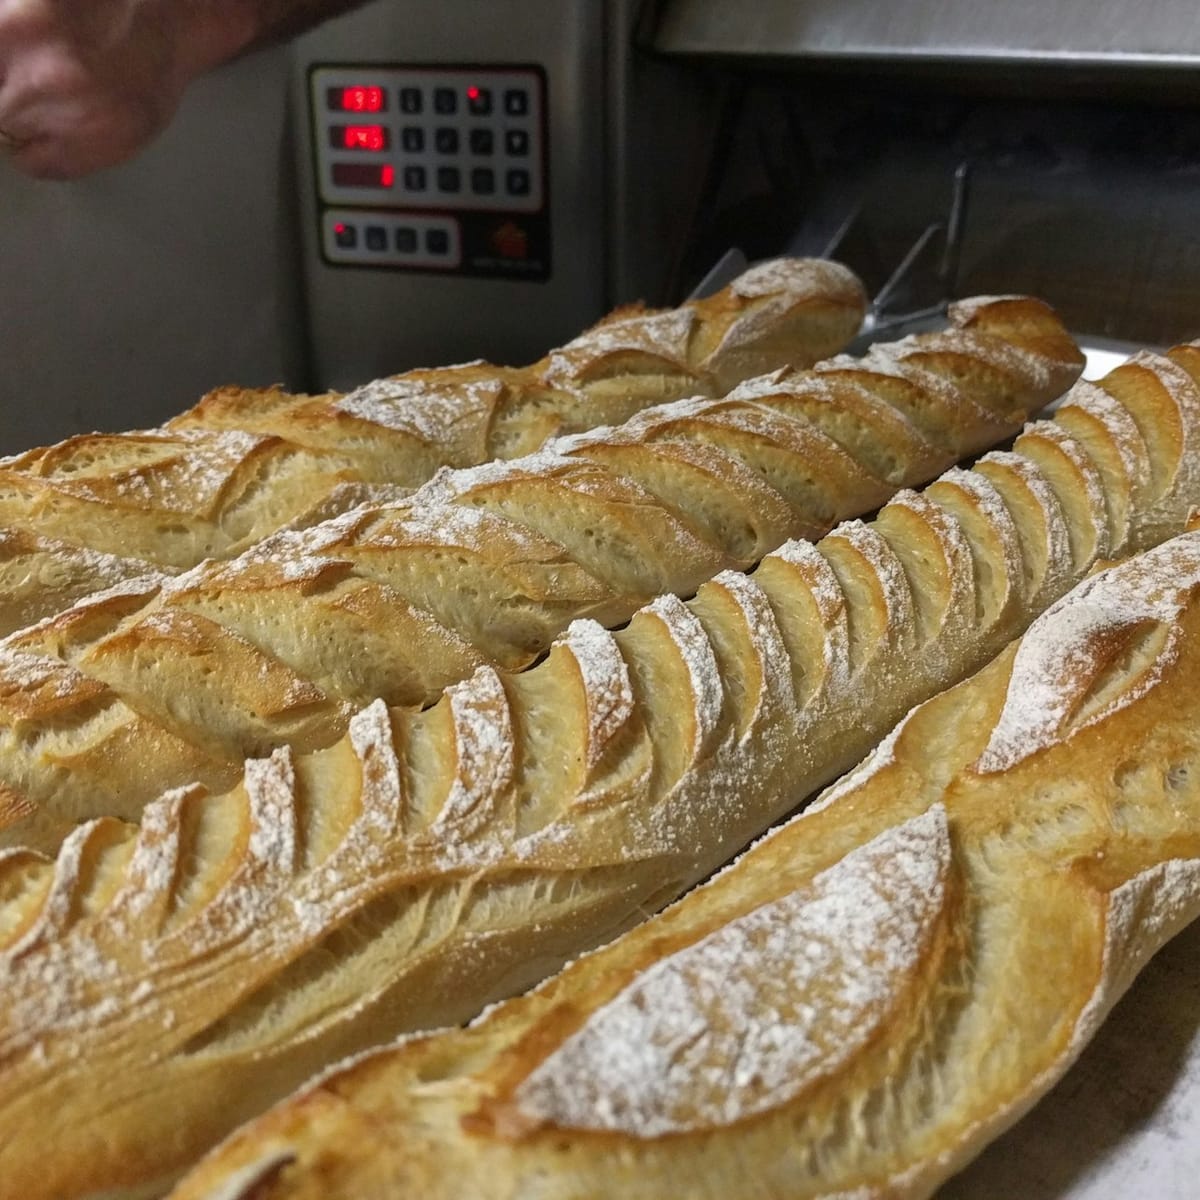 baking-class-in-a-french-bakery_1